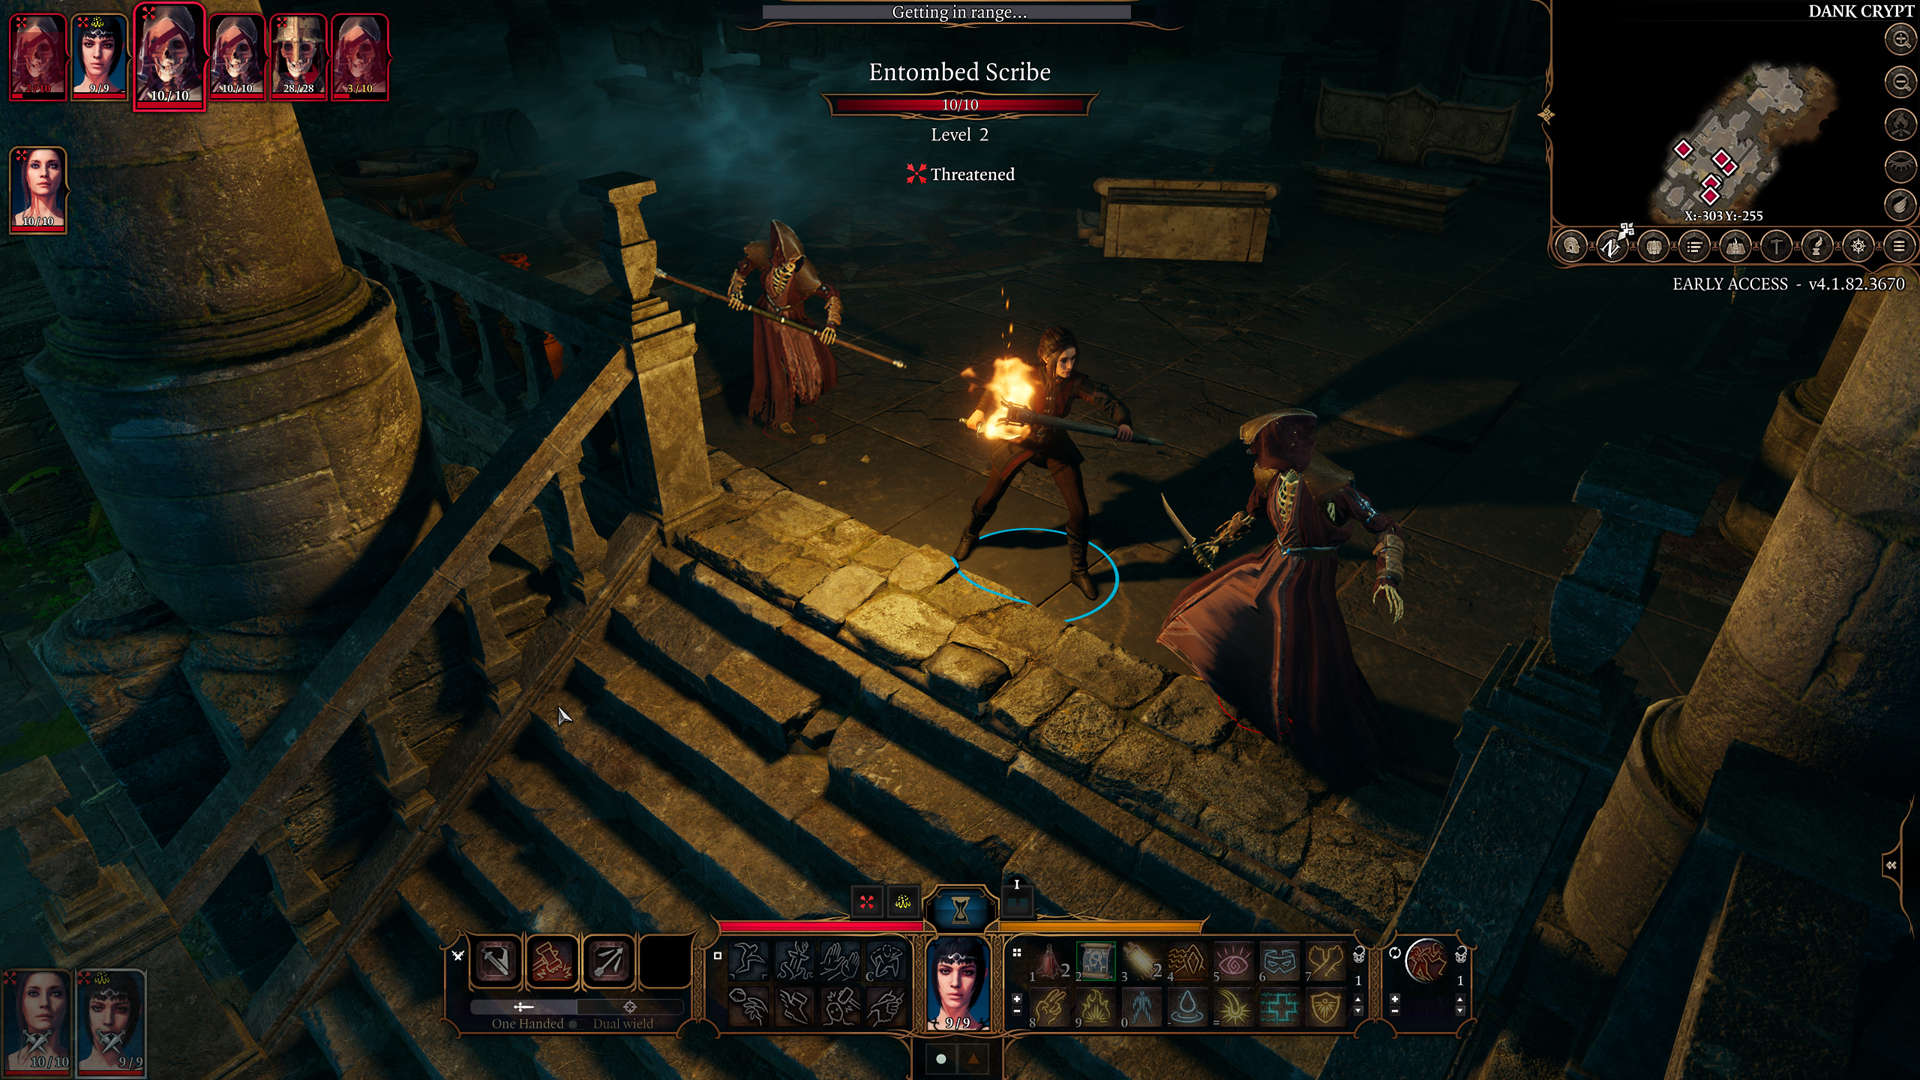 Baldur's Gate III Now Available on Early Access - RPGamer